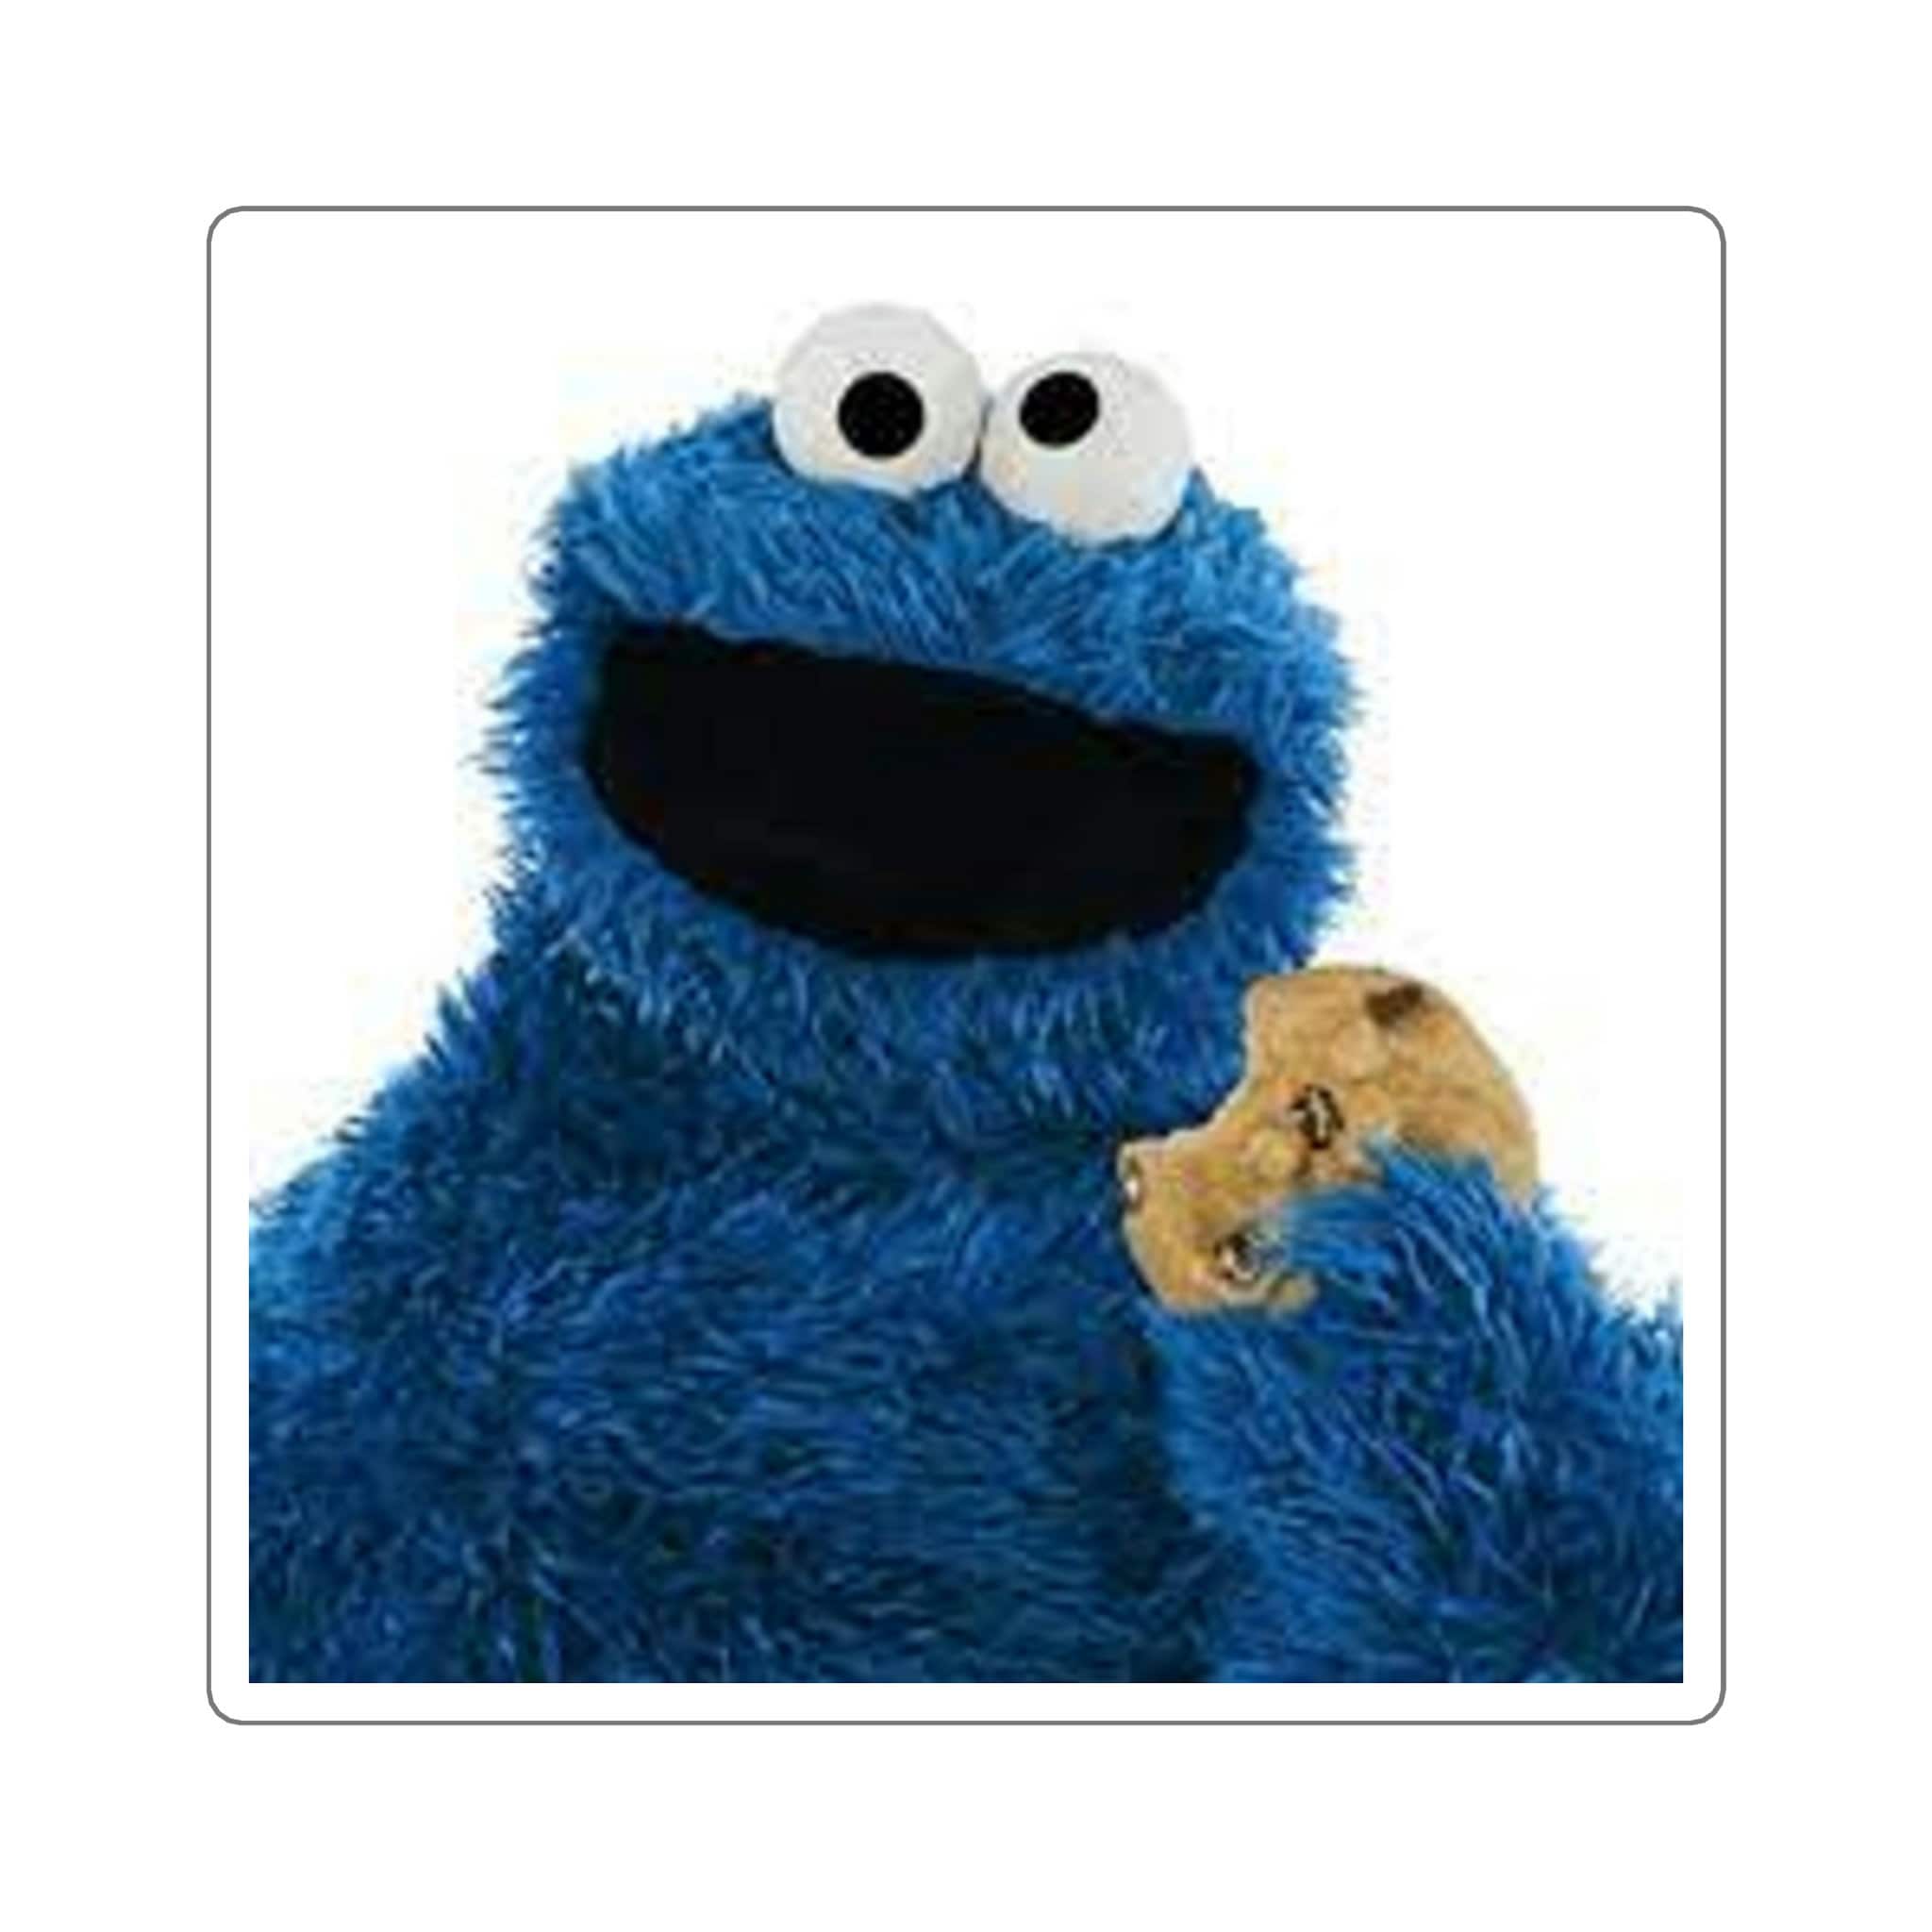 The Cookie Monster From Sesame Street LARGE 